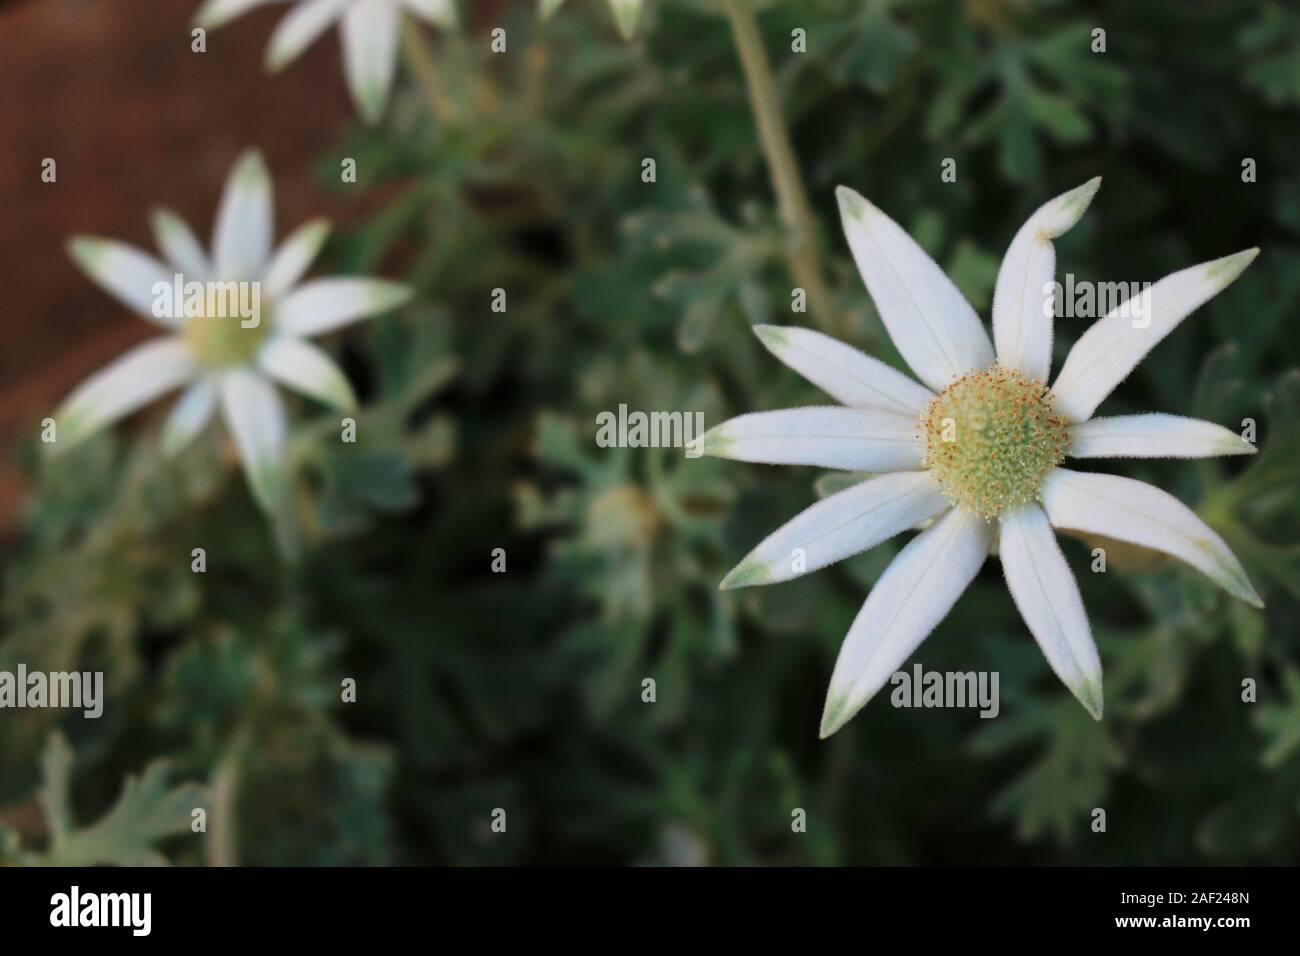 White flowers of Actinotus helianthi called 'Flannel flower' blooming in the flowerbed of winter Stock Photo